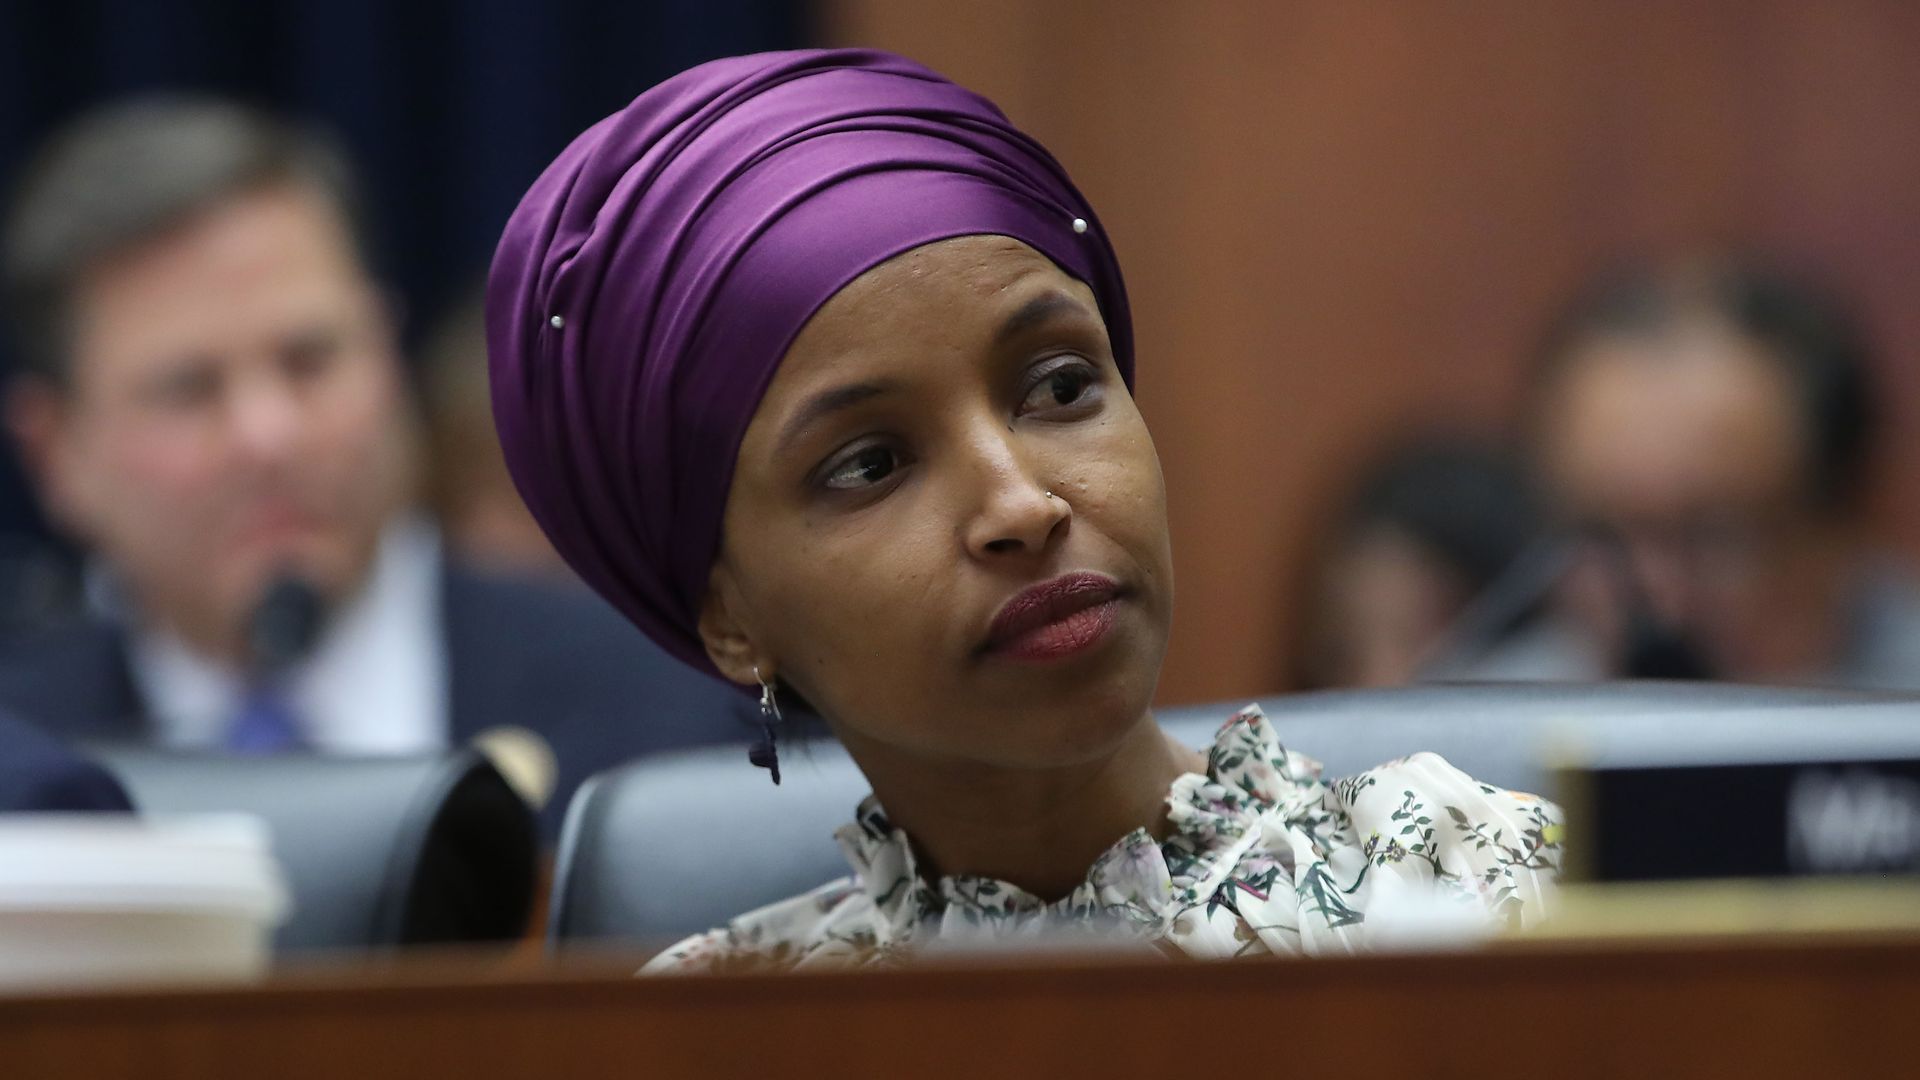 Ilhan Omar says she's received more death threats since President Trump's tweet.